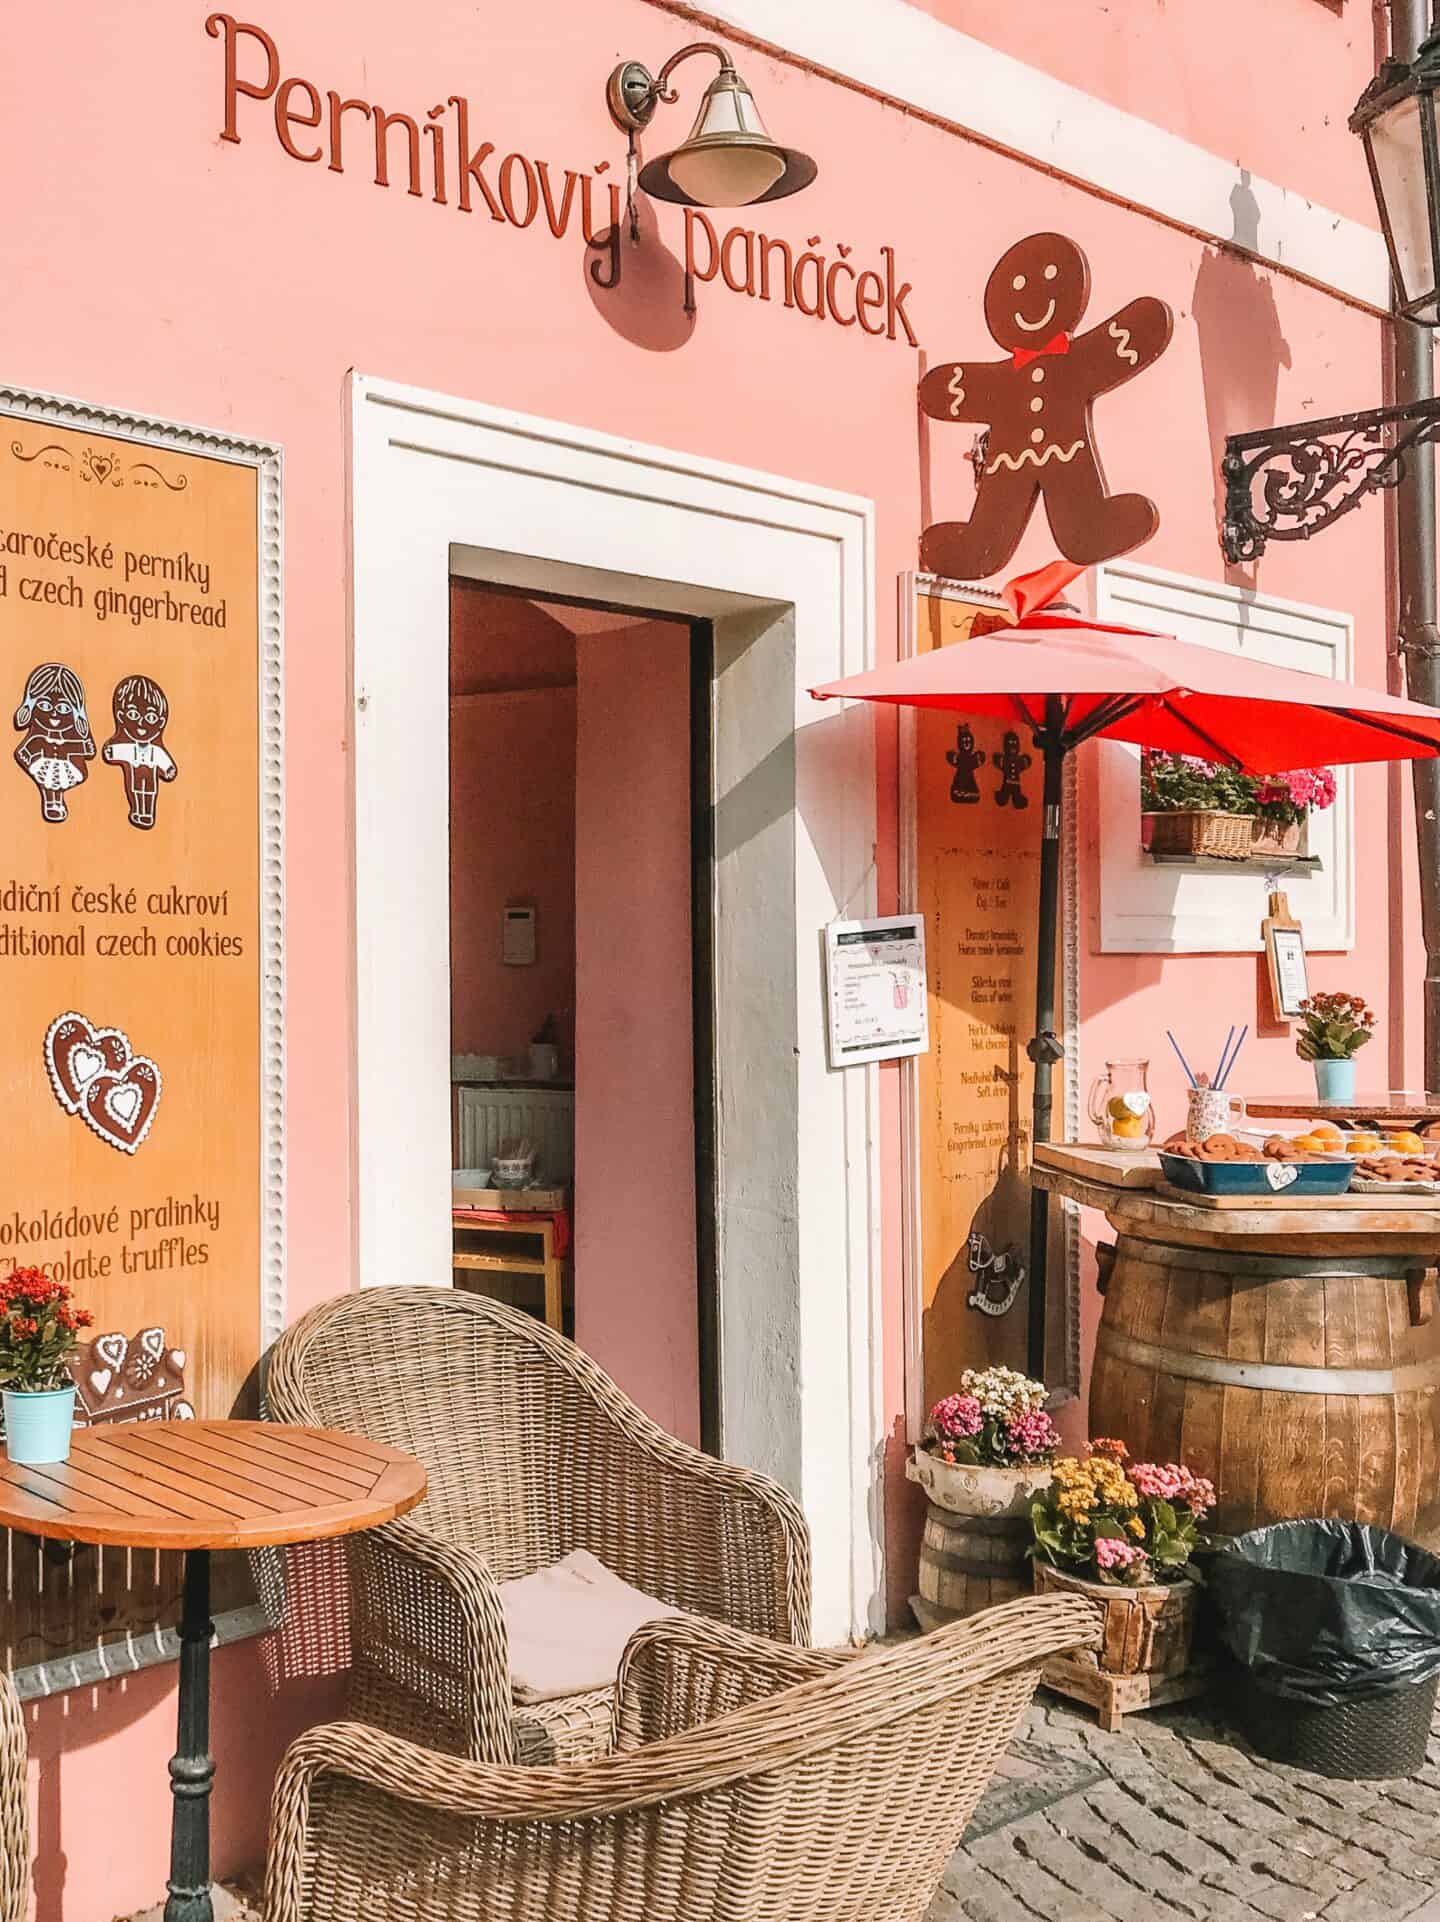 The outside of Pernikovy Panacek – the site of the best gingerbread in Prague.